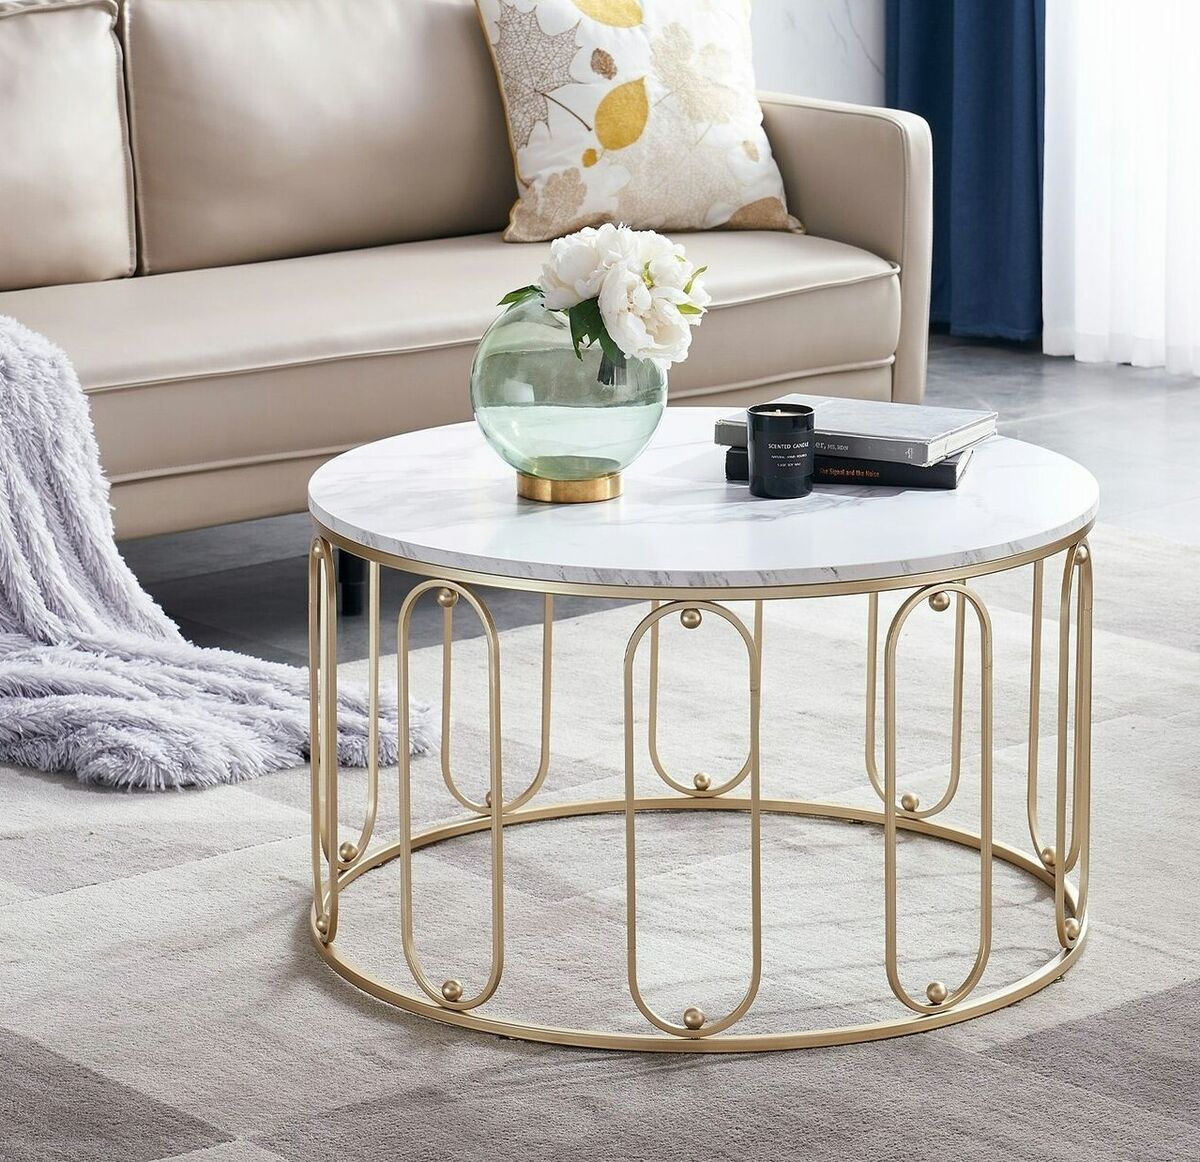 Ivinta Modern Nesting Coffee Table, Home Round Cocktail Table With Metal  Frame | Ebay With Regard To Modern Nesting Coffee Tables (Photo 2 of 15)